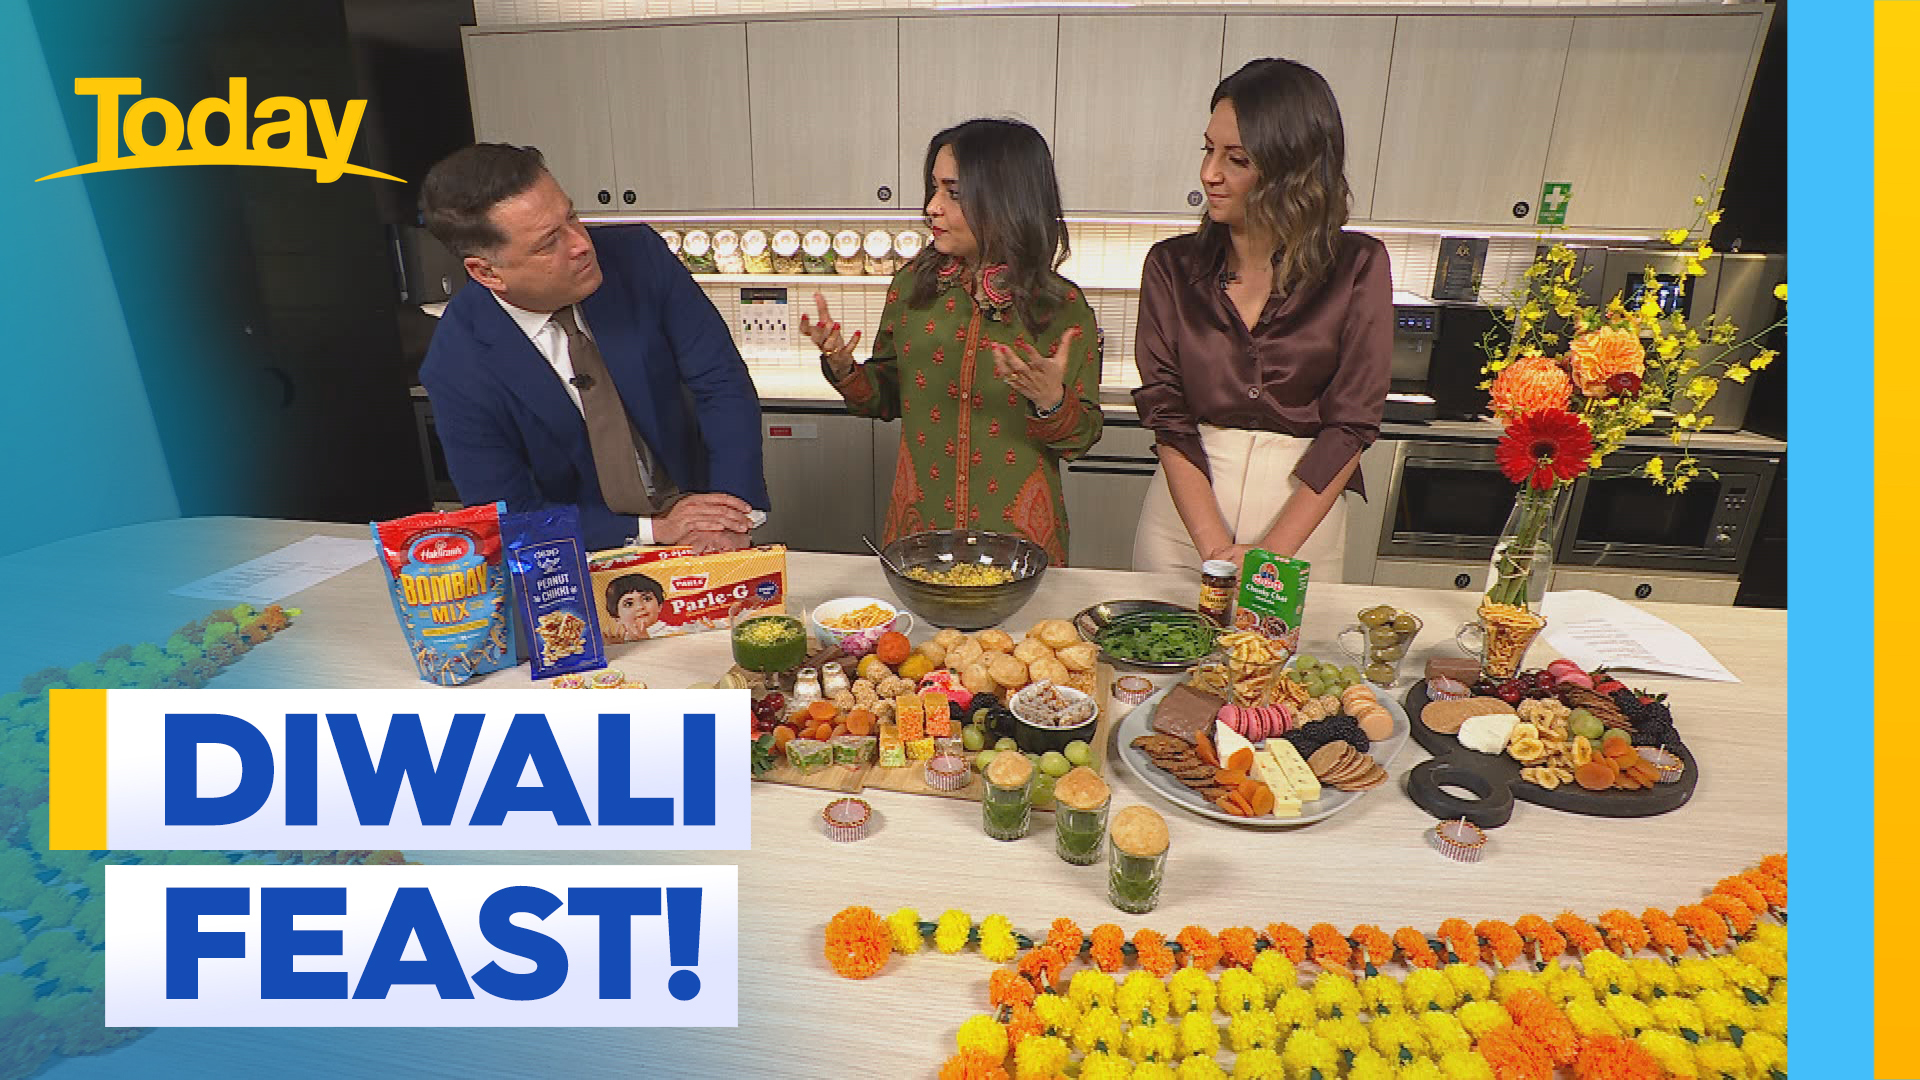 Cook your own Diwali treats at home